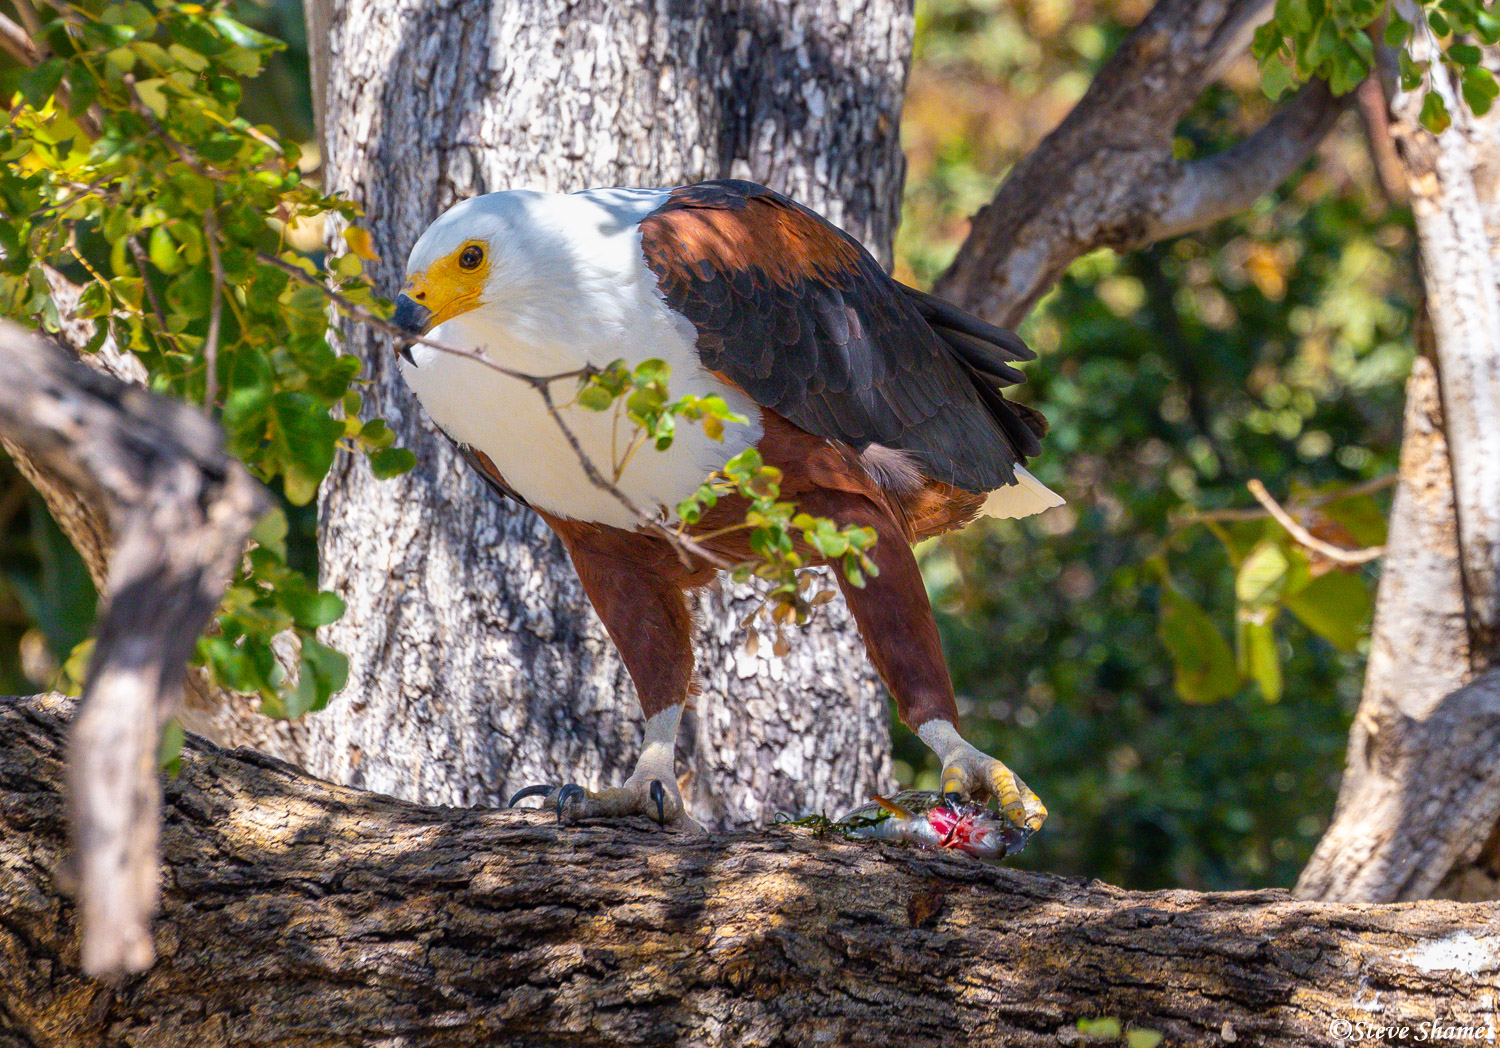 Fish eagle settling down on a tree limb to eat his catch.